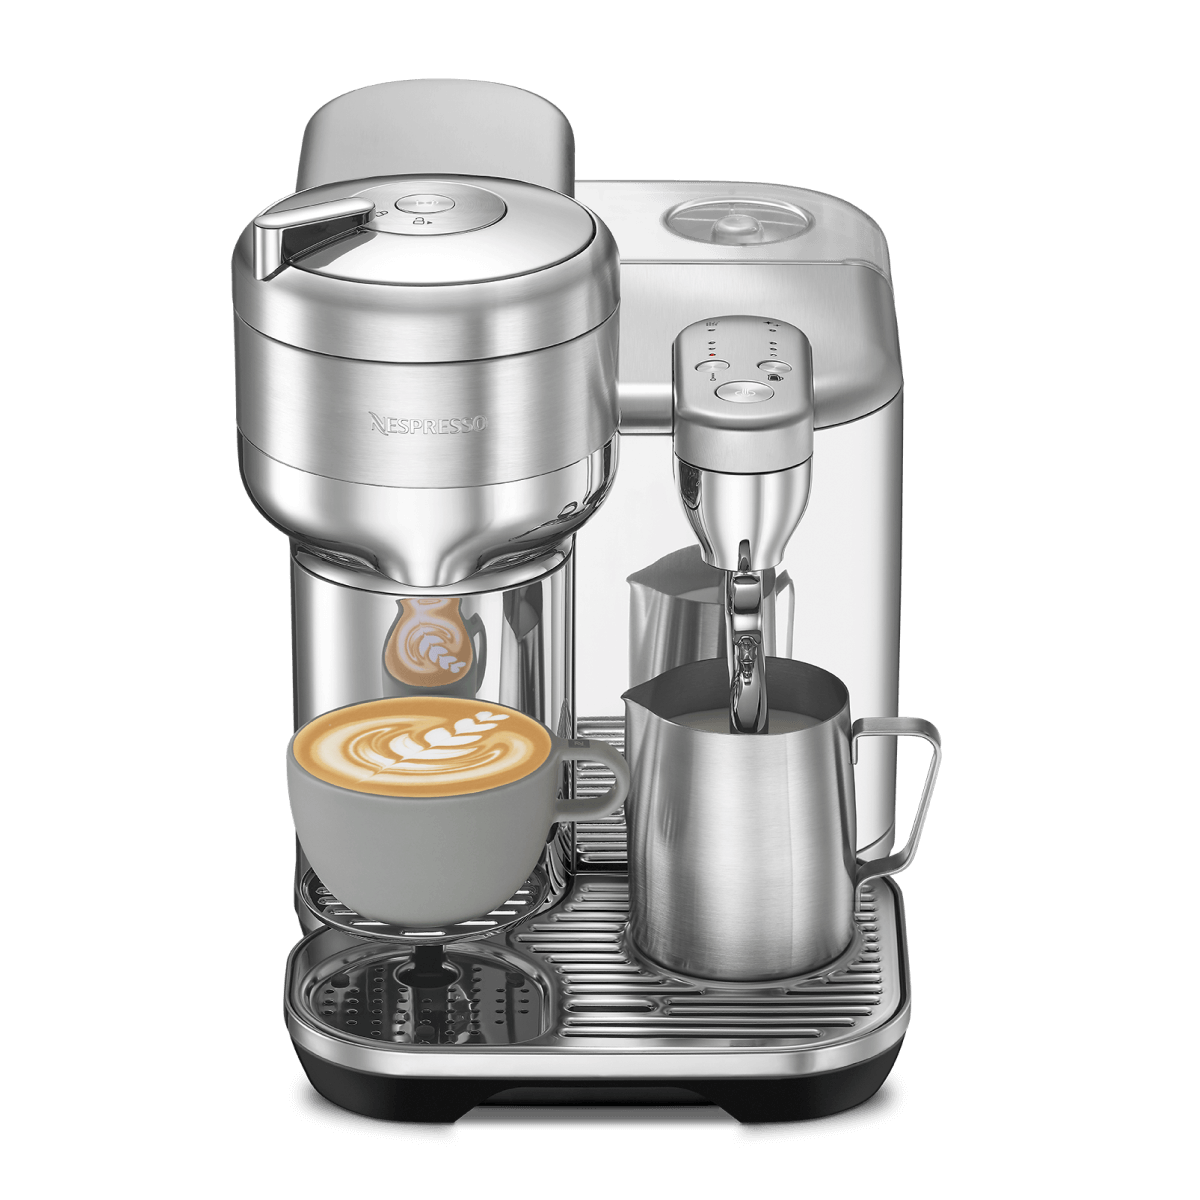 Stainless-Steel Espresso Cup + Reviews